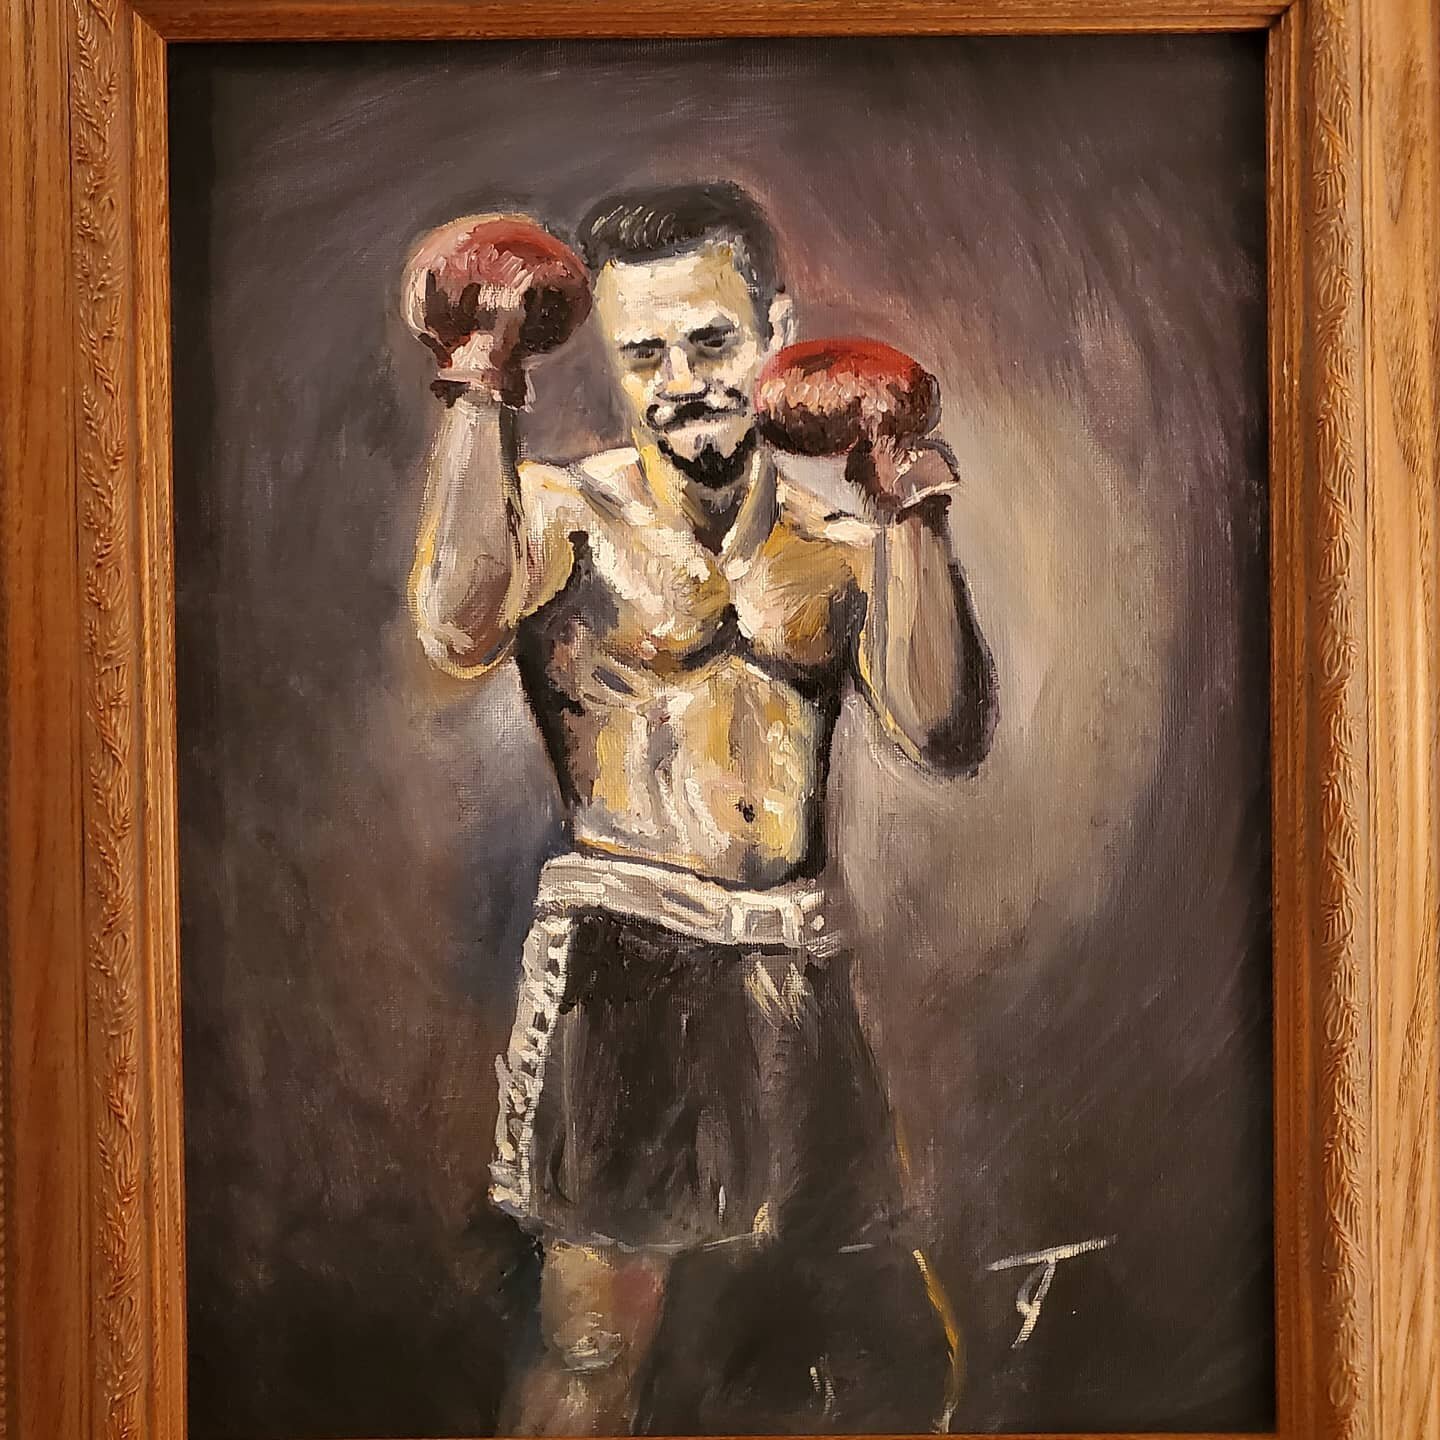 &quot;Fighter&quot; 
11x14
Oil on Canvasboard 

♡ 

Created for the Figuratively Speaking Exhibition at the York Art Association Inc. Opening reception is on 7-24-22 from 2-4pm for those who want to check this piece out along with many other regional